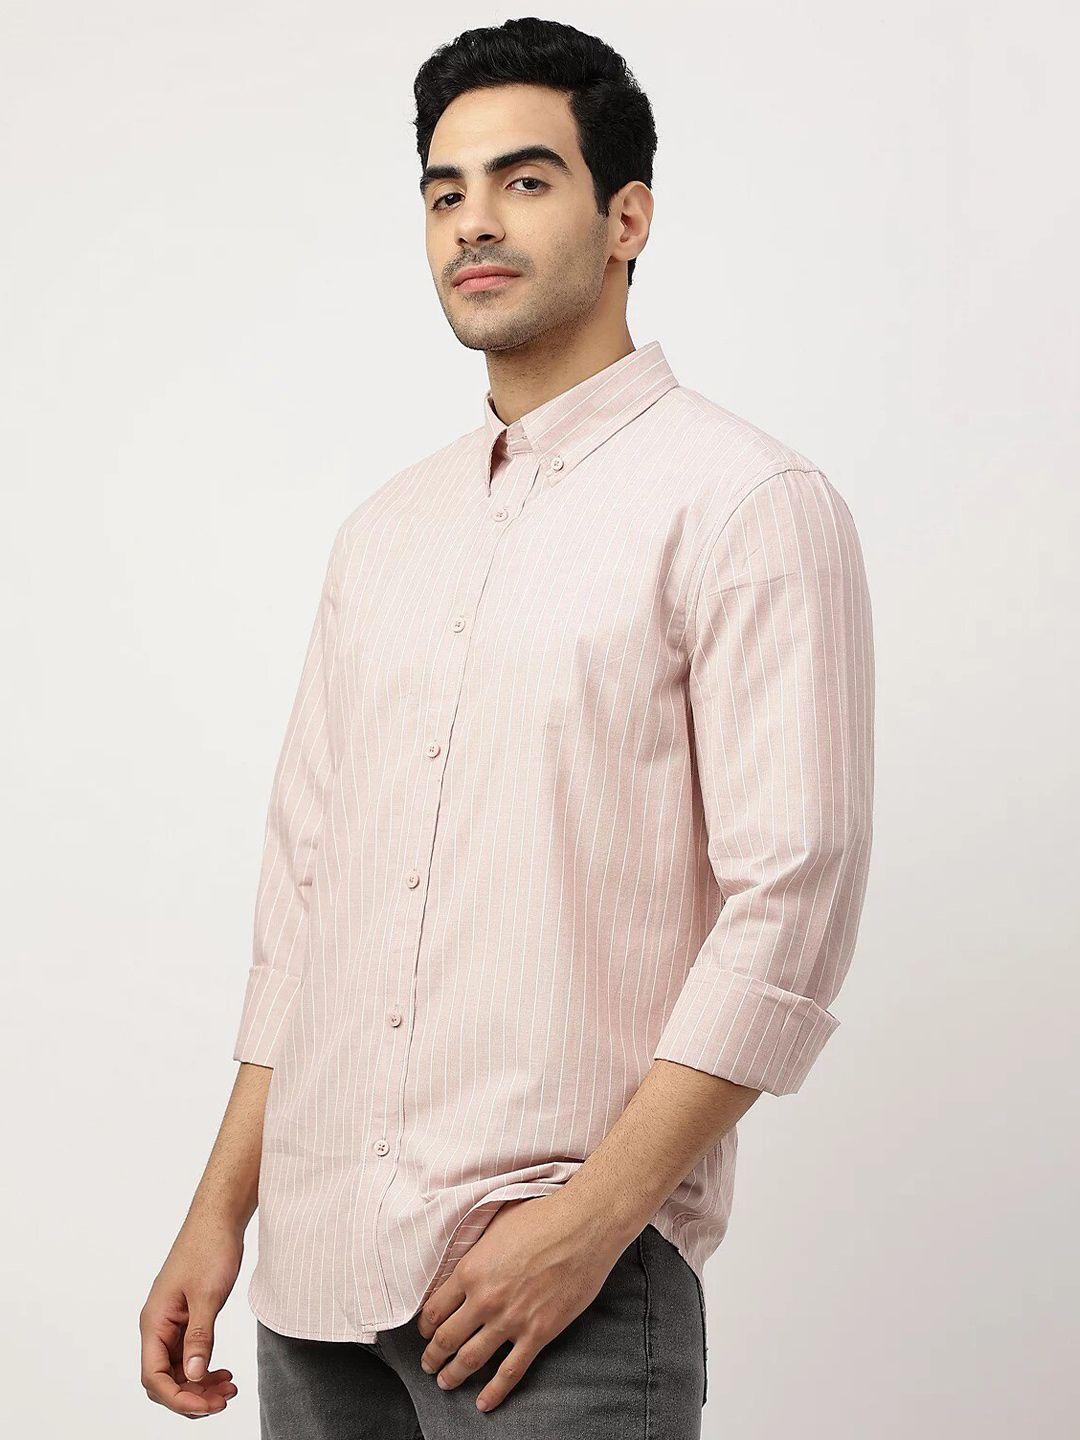 marks & spencer vertical striped casual shirt